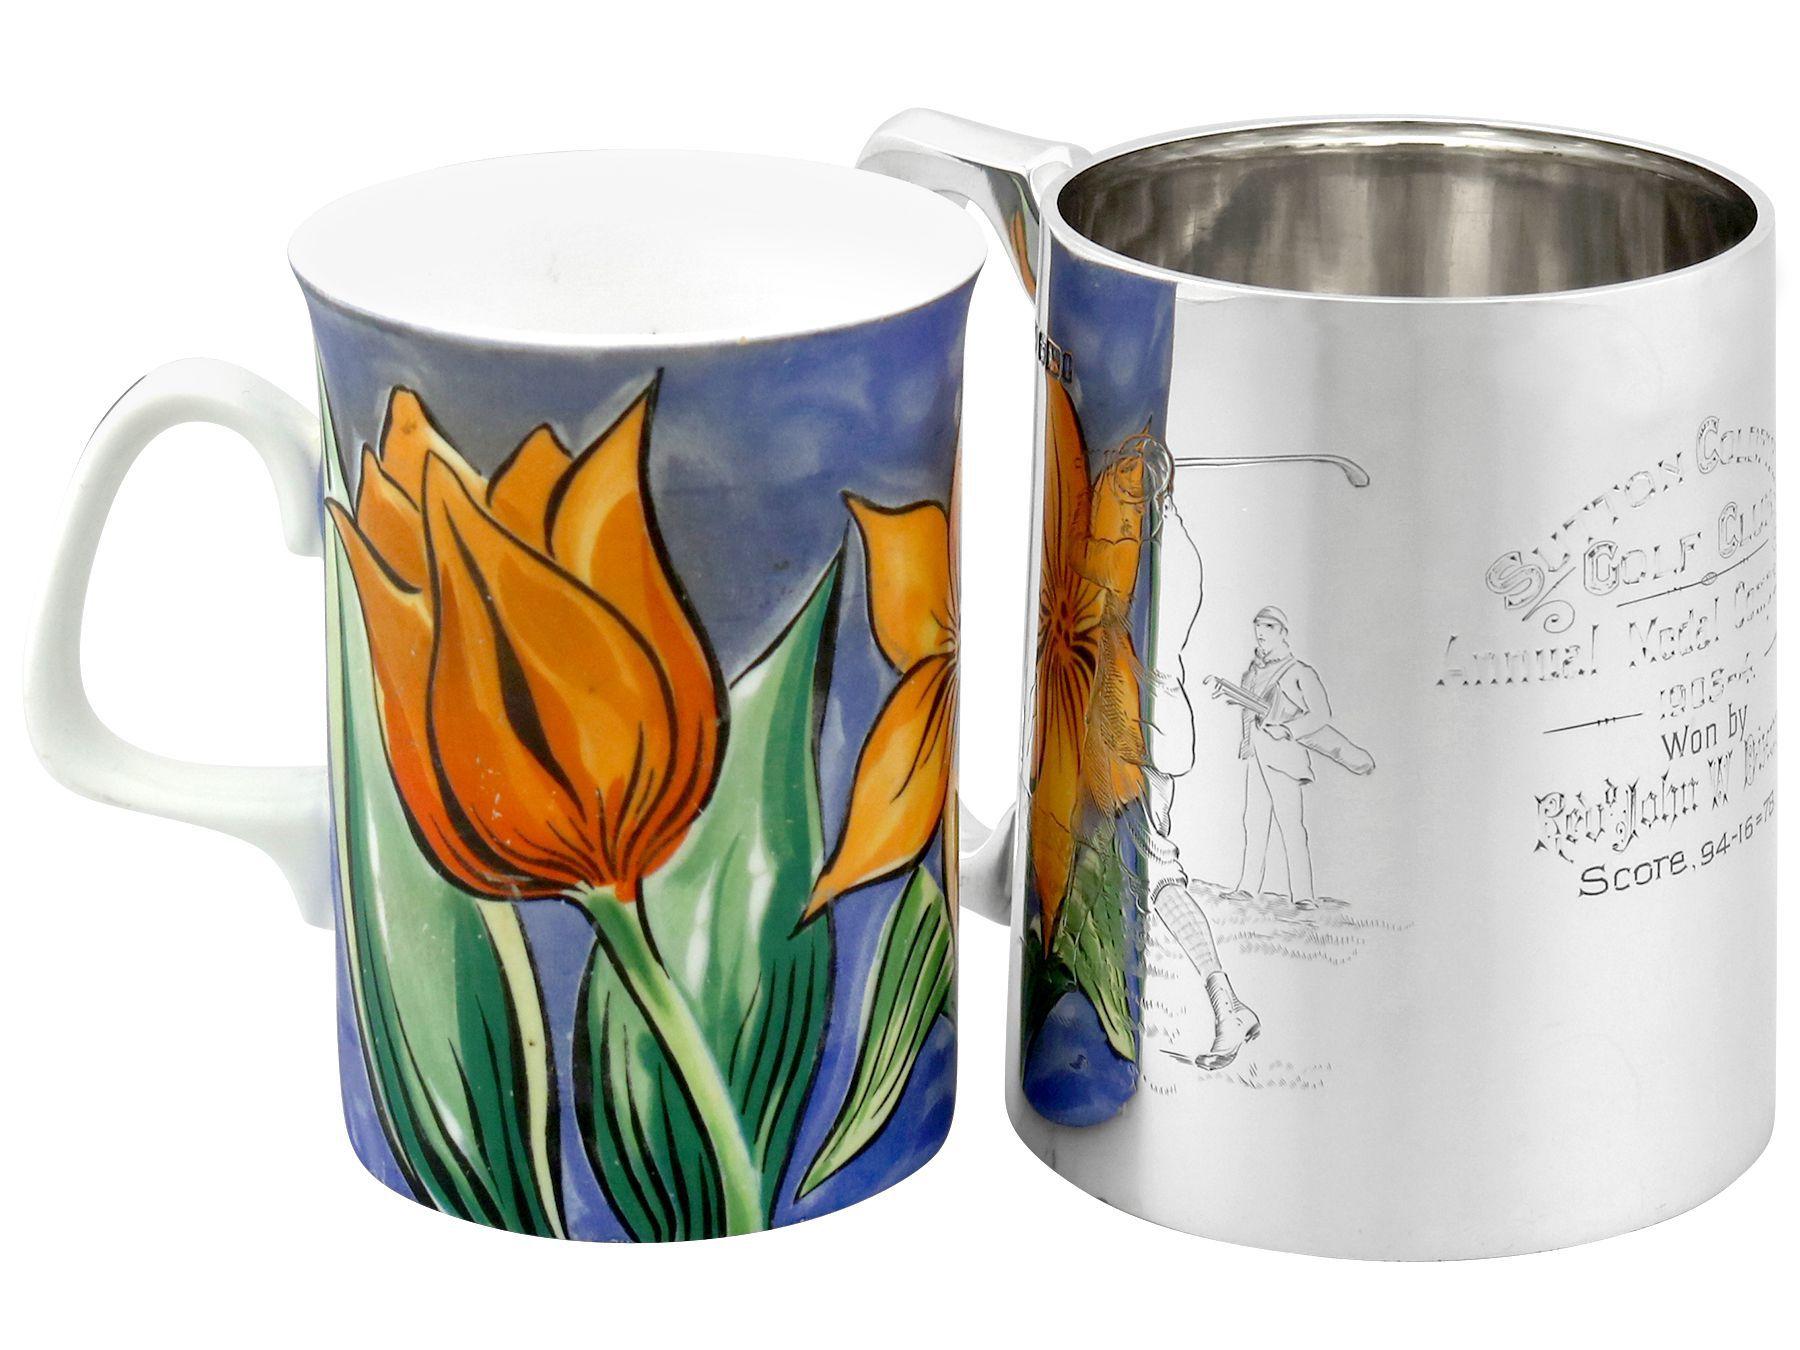 An exceptional, fine and impressive antique Edwardian English sterling silver mug with golf interest; an addition to our silver presentation collection.

This exceptional antique Edwardian sterling silver mug has a subtly tapering cylindrical